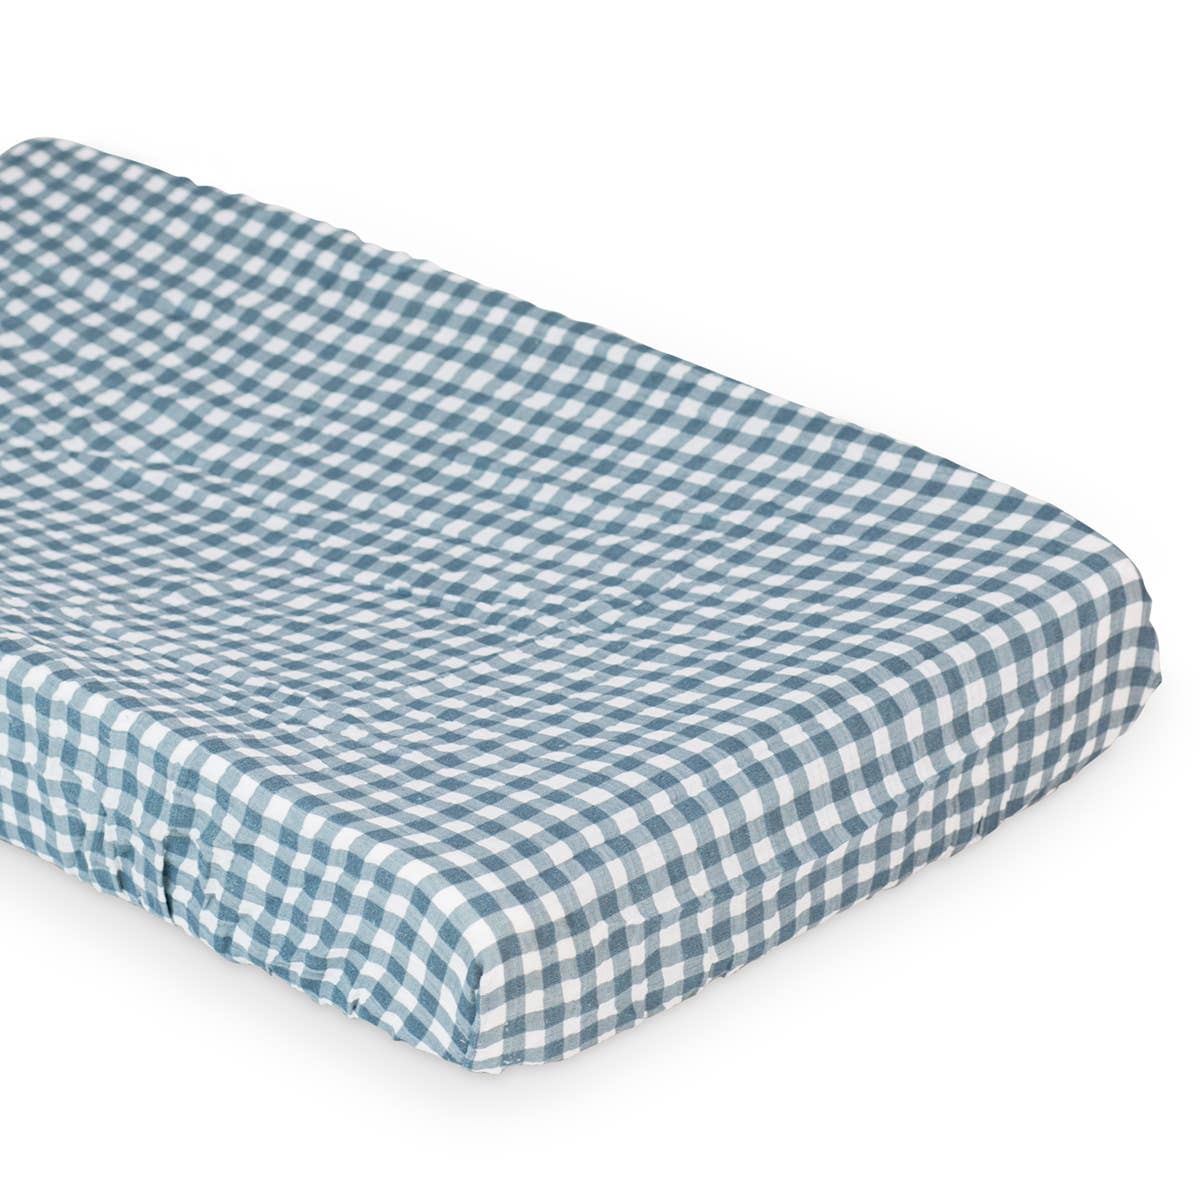 Cotton Change Pad Cover - Navy Gingham